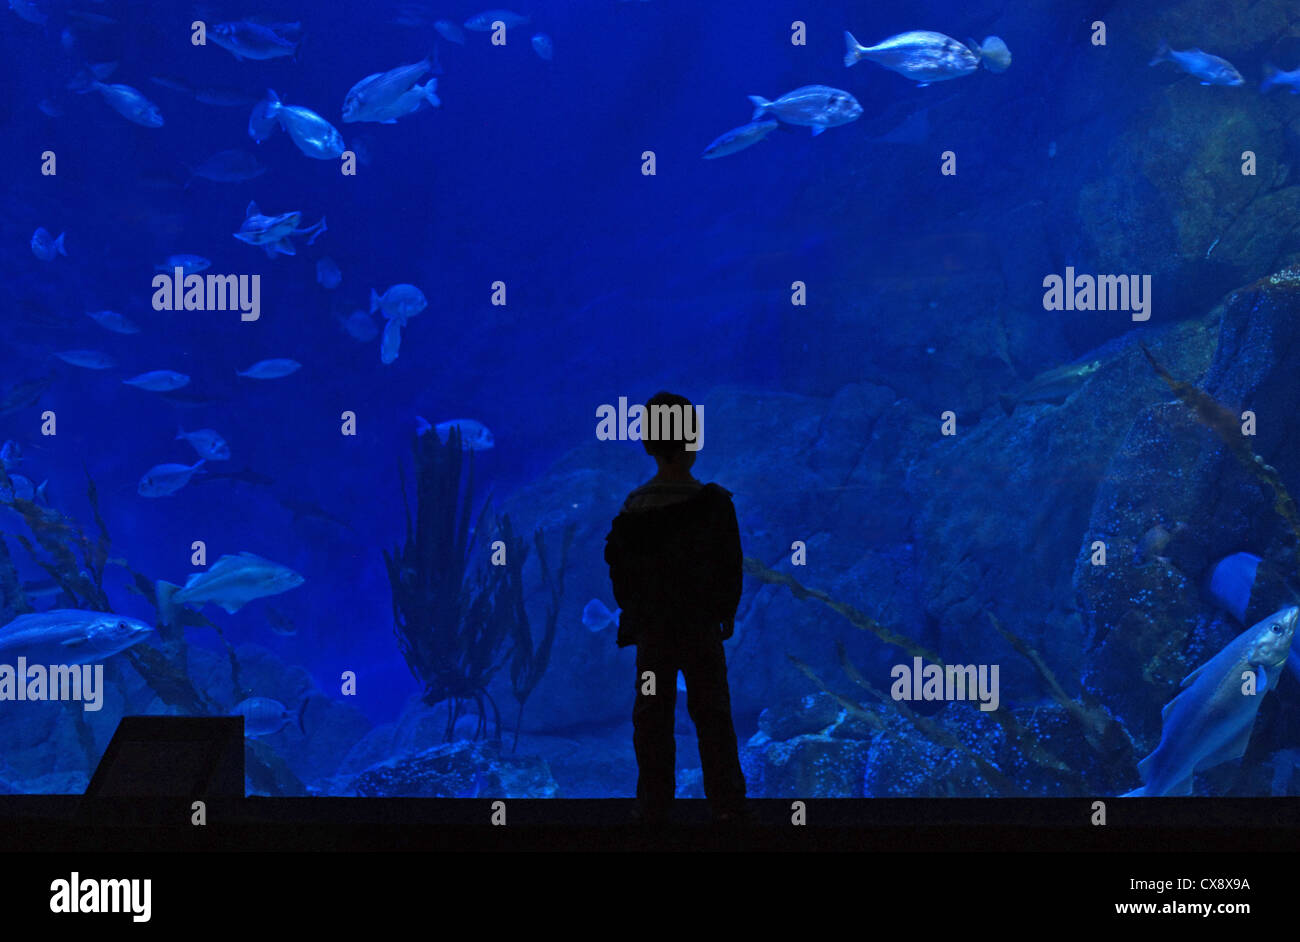 Giant Fish Tank High Resolution Stock Photography and ...